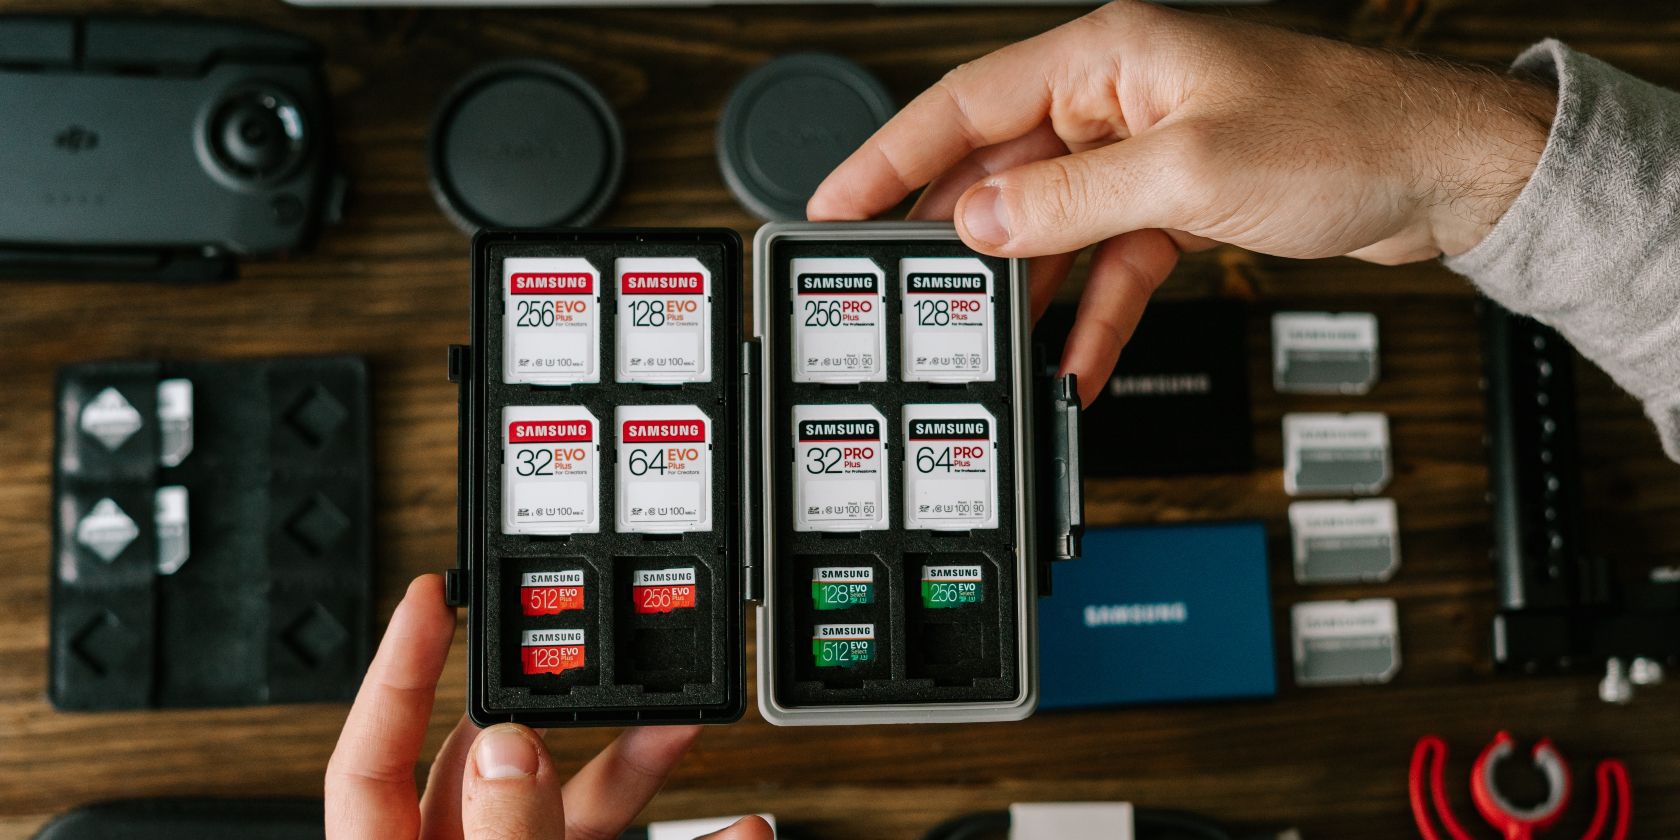 Image showing SD cards in a person's hand 